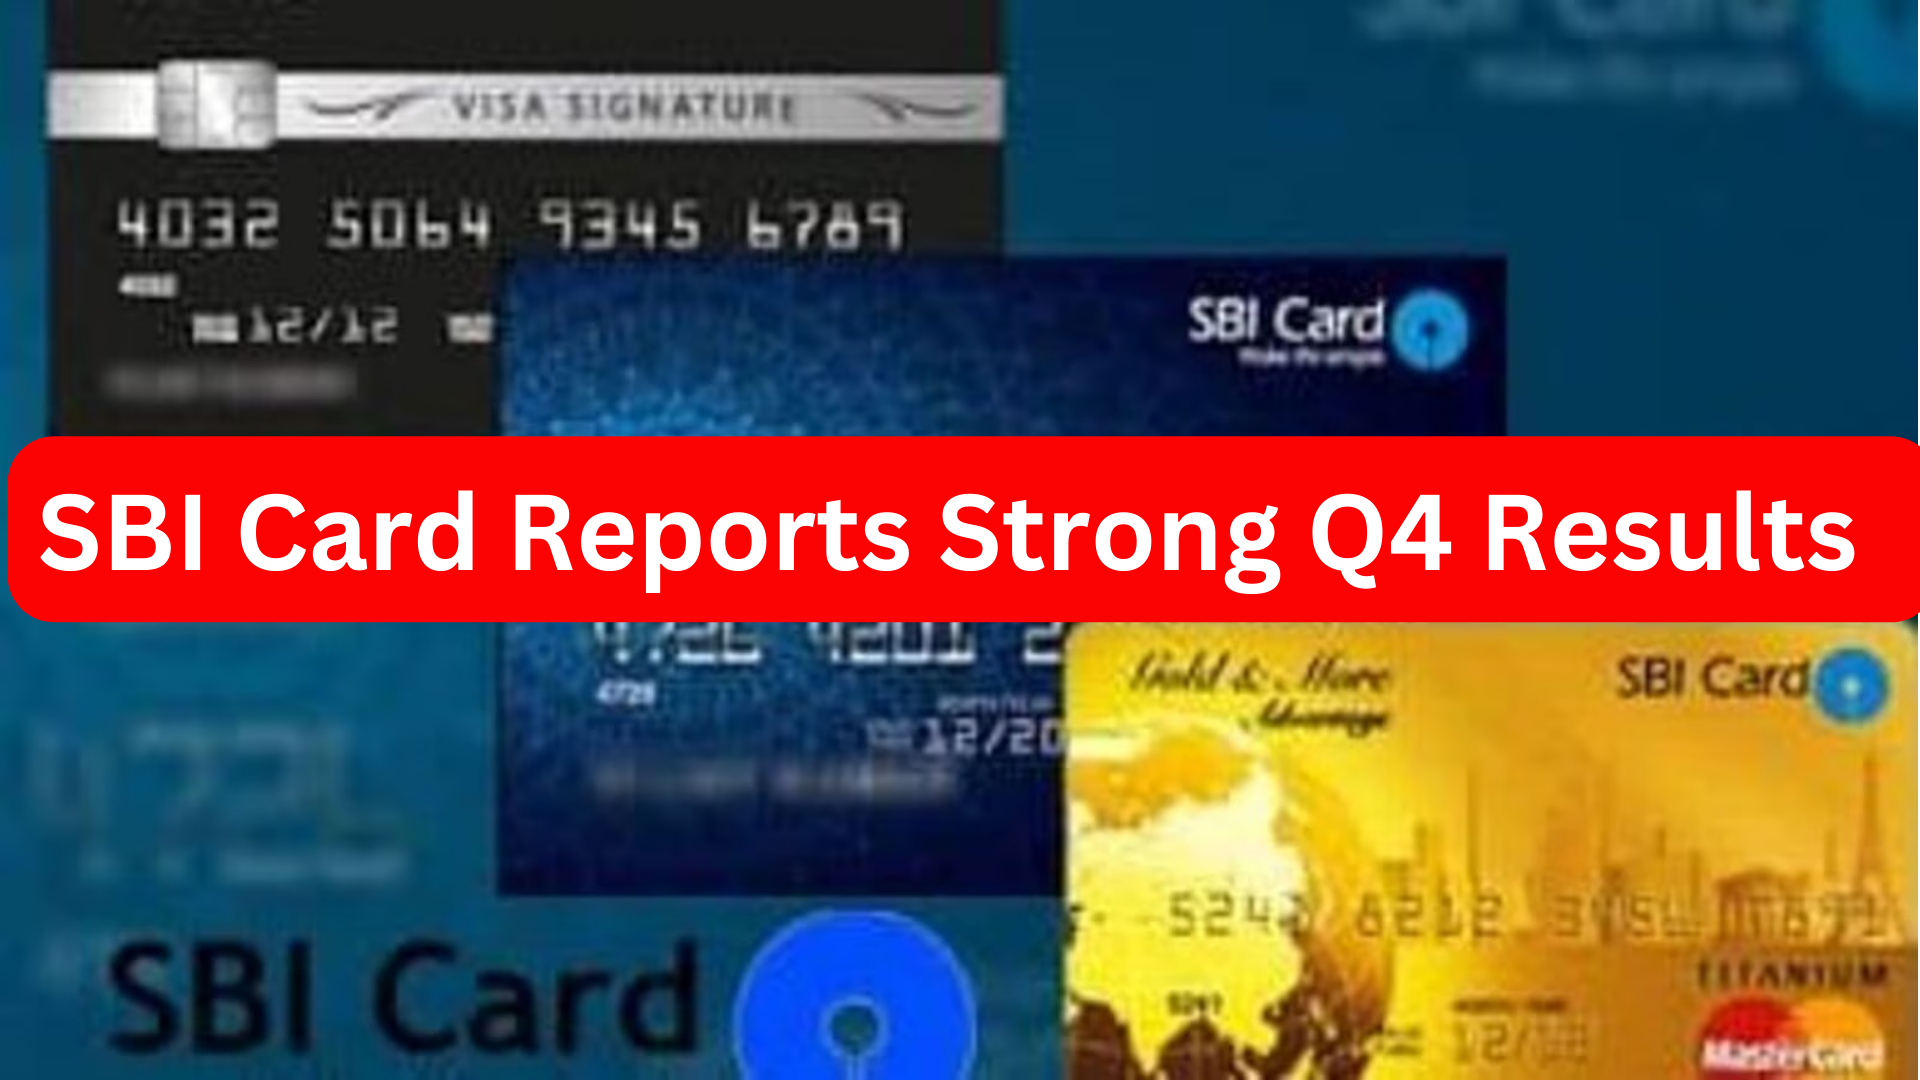 How is SBI Card Reports Q4 Results with 11% Profit Growth?